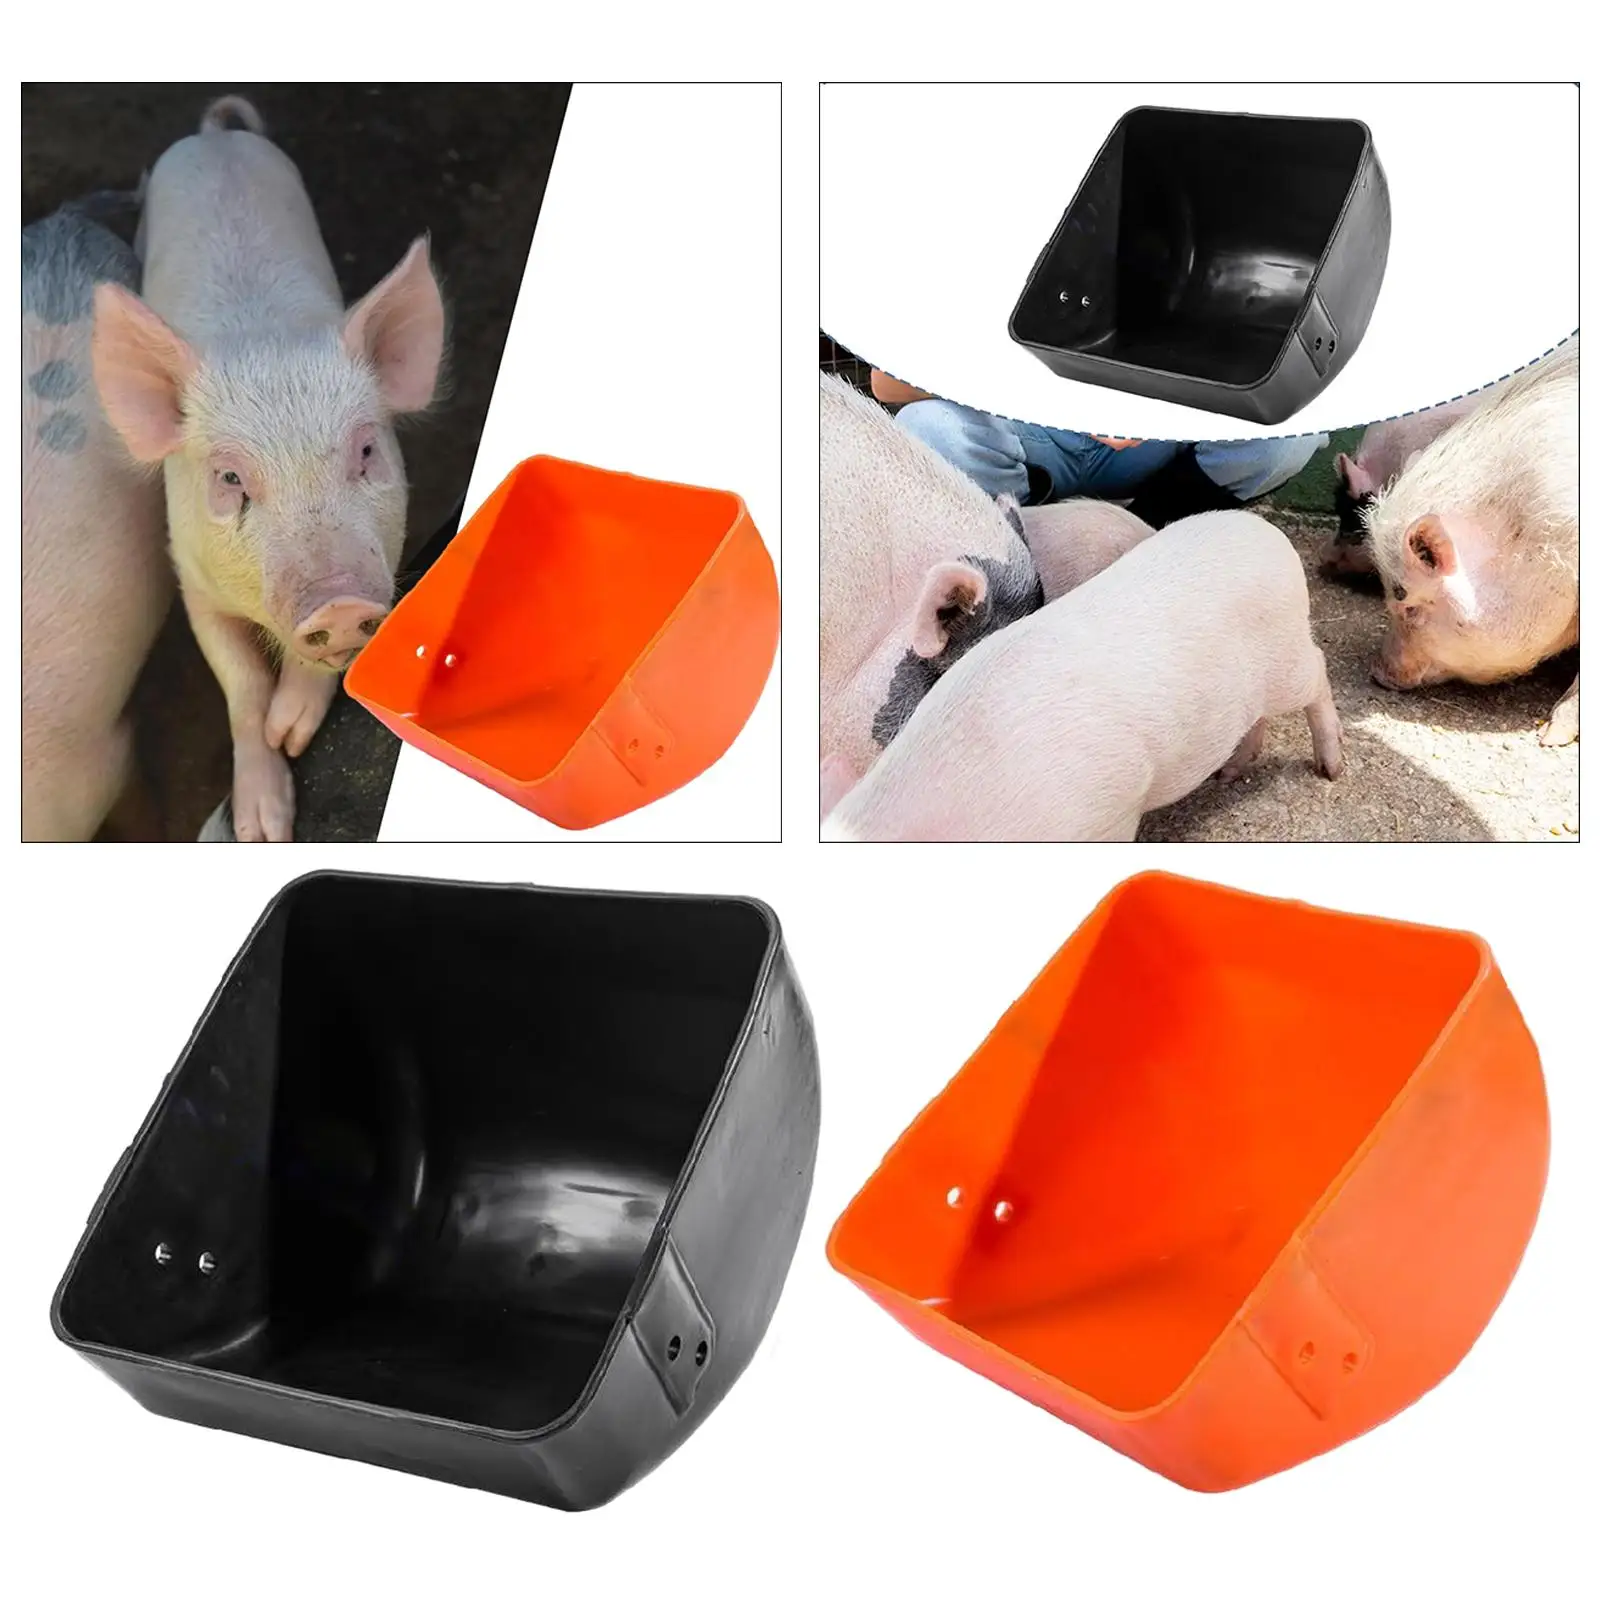 Pig feed Trough Mountable Bucket Food Tray Livestock feed Bowl Piglet Creep Feeder for Poultry Animal Animal Husbandry Equipment